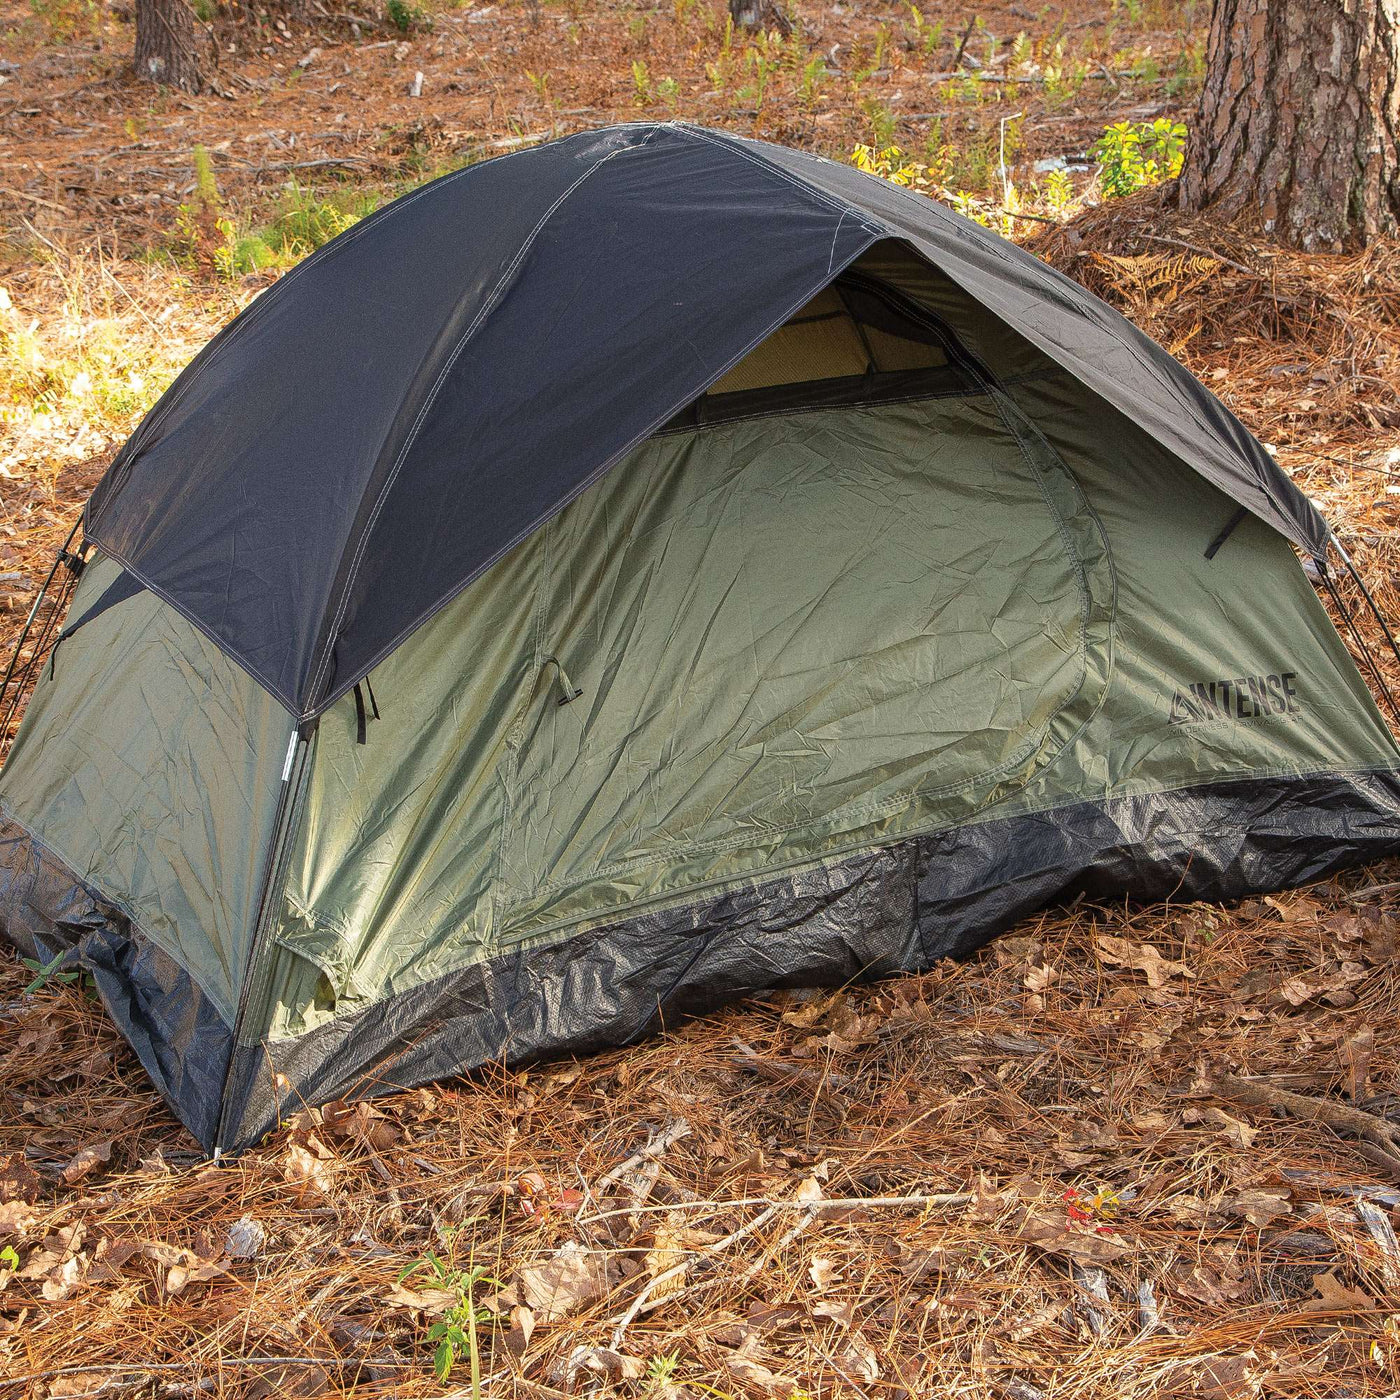 PGK - Light, affordable and versatile inflatable tent